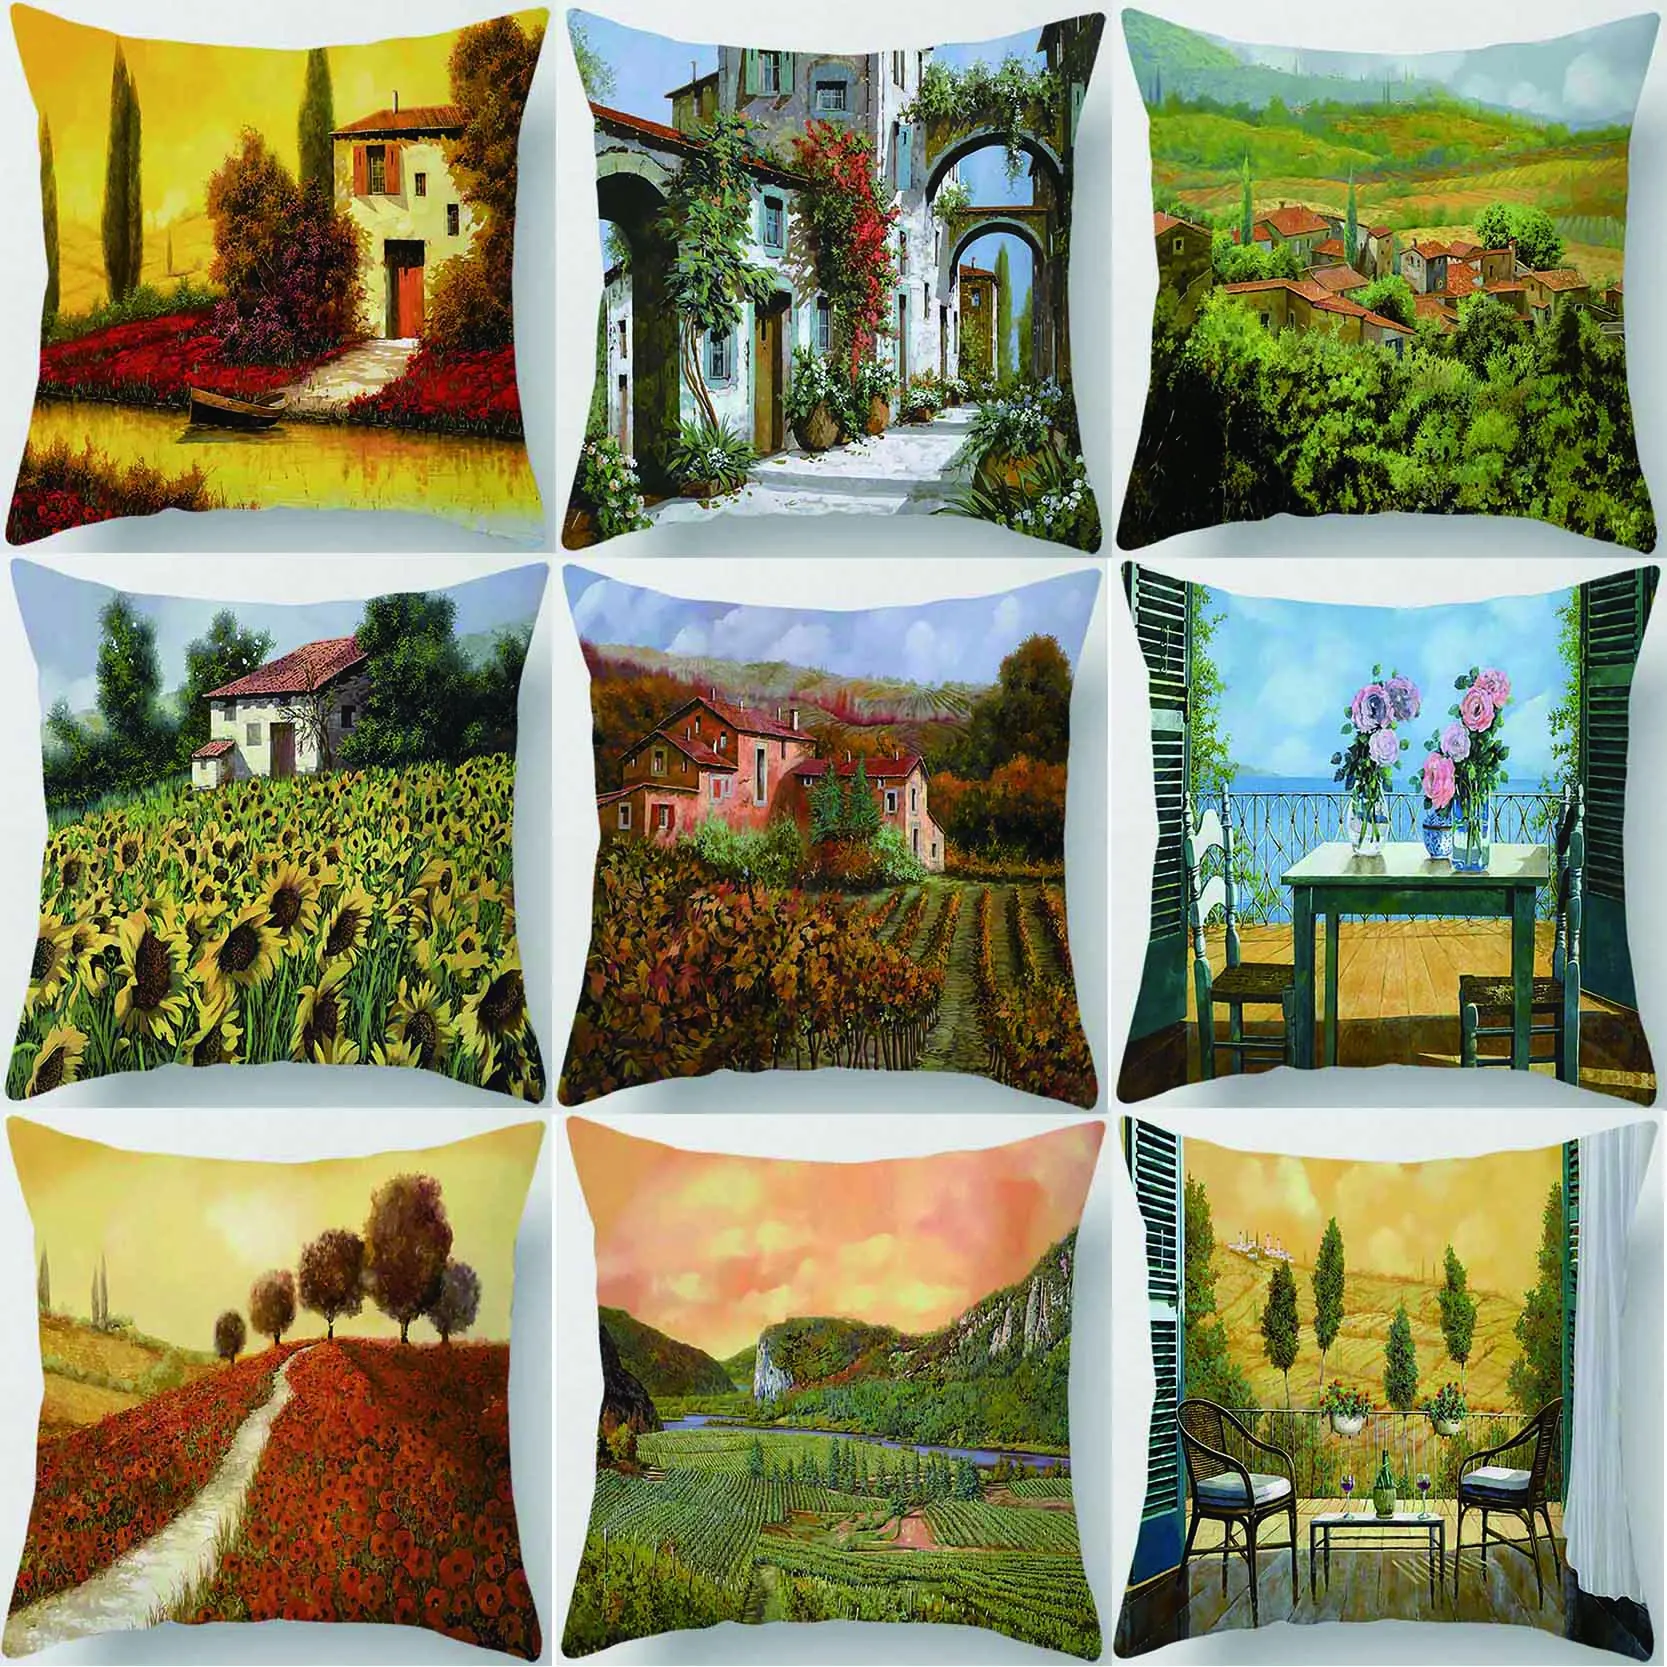 

Comfortable Pastoral Life Square Printing In The Cactus Desert Is Used for Home Decoration, Car Sofa Cushion Cover45cm*45cm